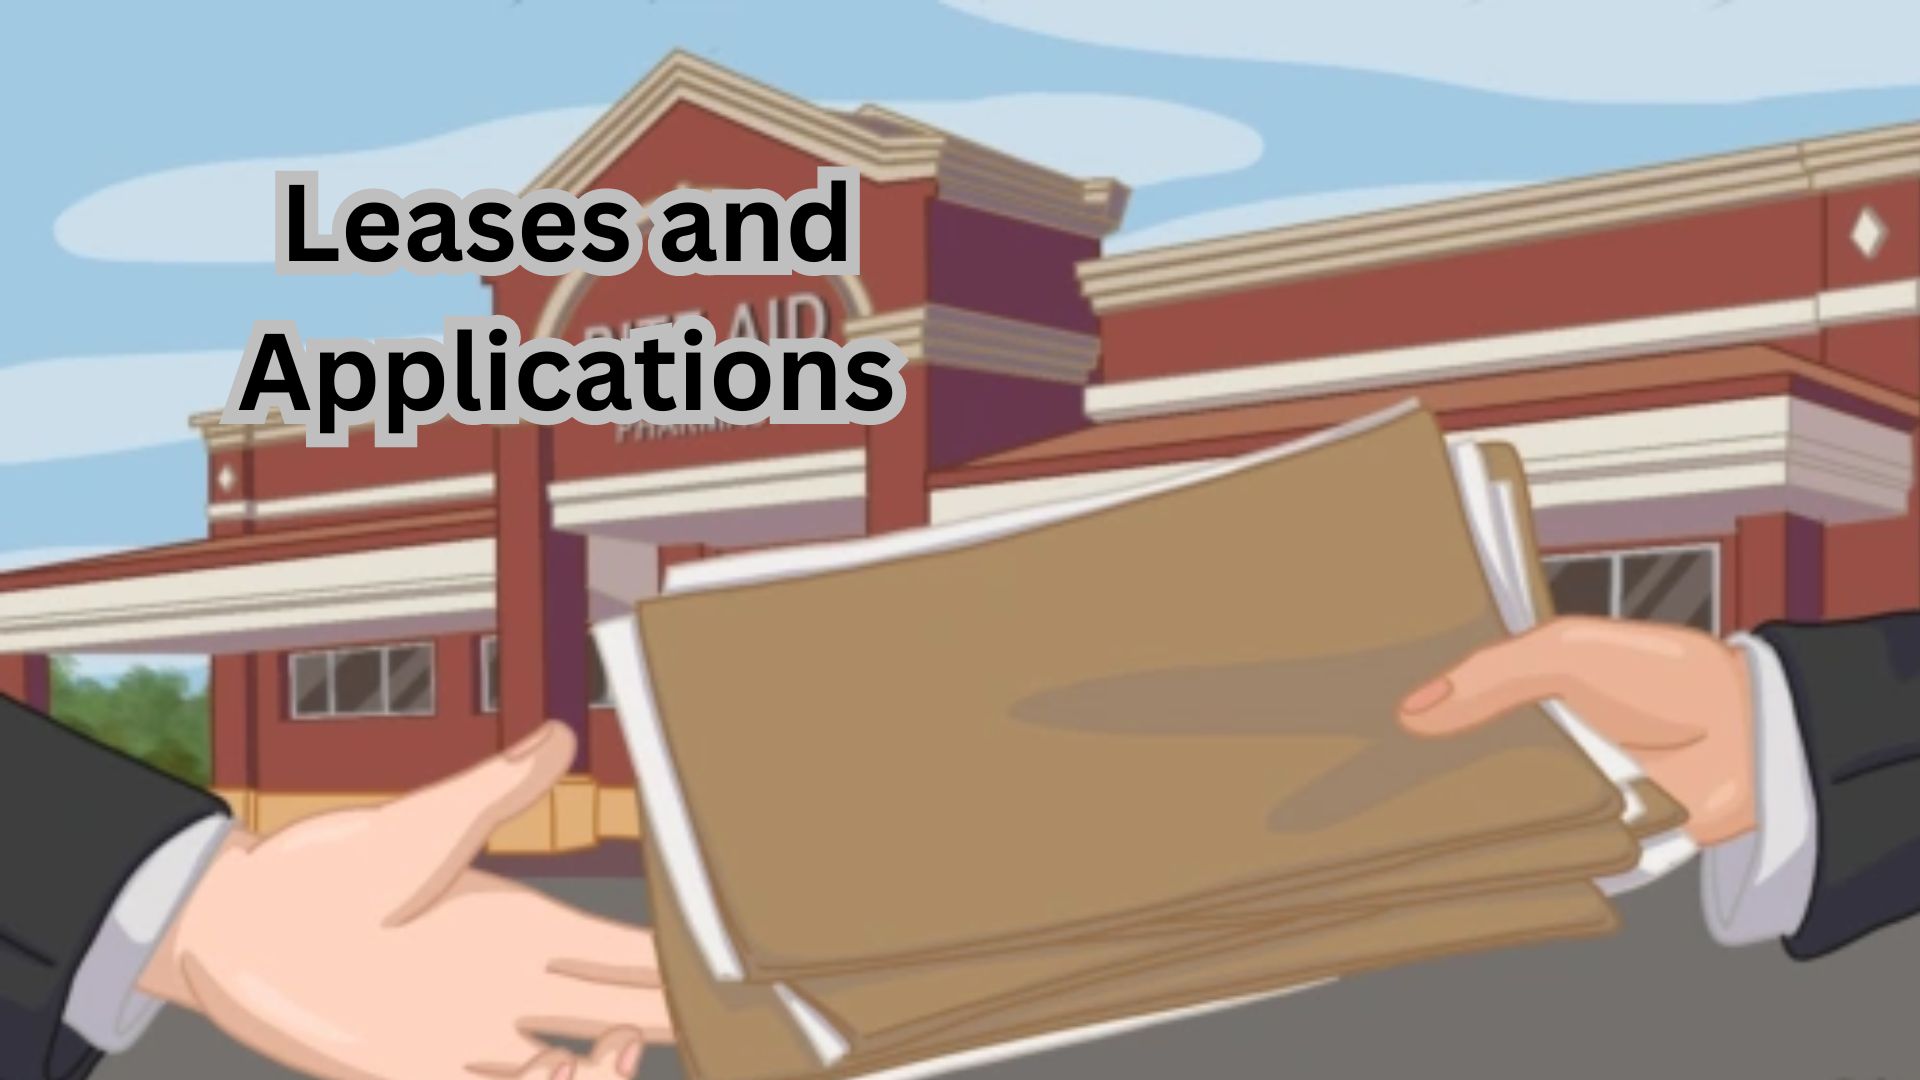 Leases and Applications.